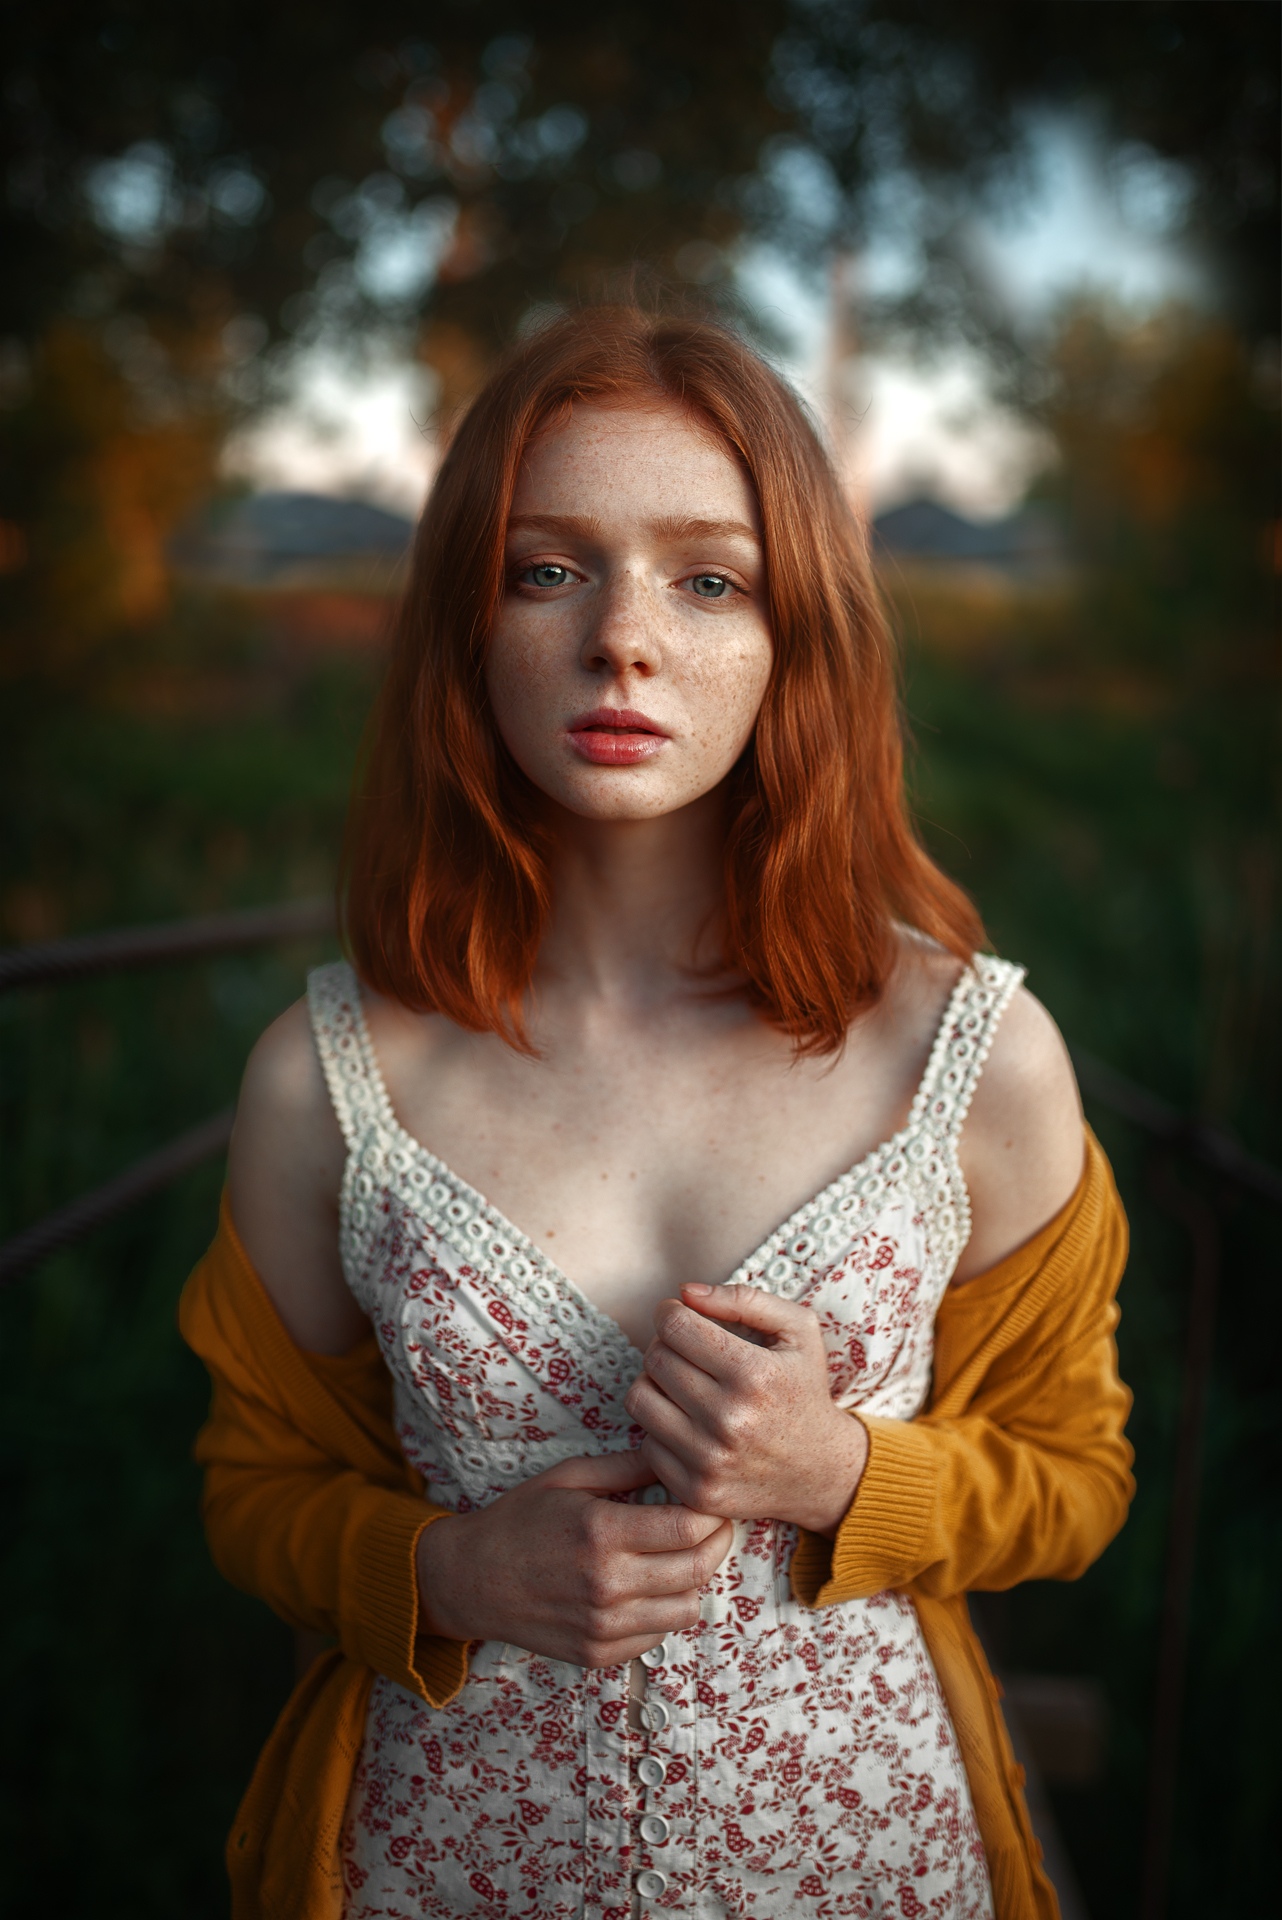 Women Model Redhead Freckles Looking At Viewer Outdoors Dress Sweater Yellow Sweater Bokeh Field Wom 1282x1920